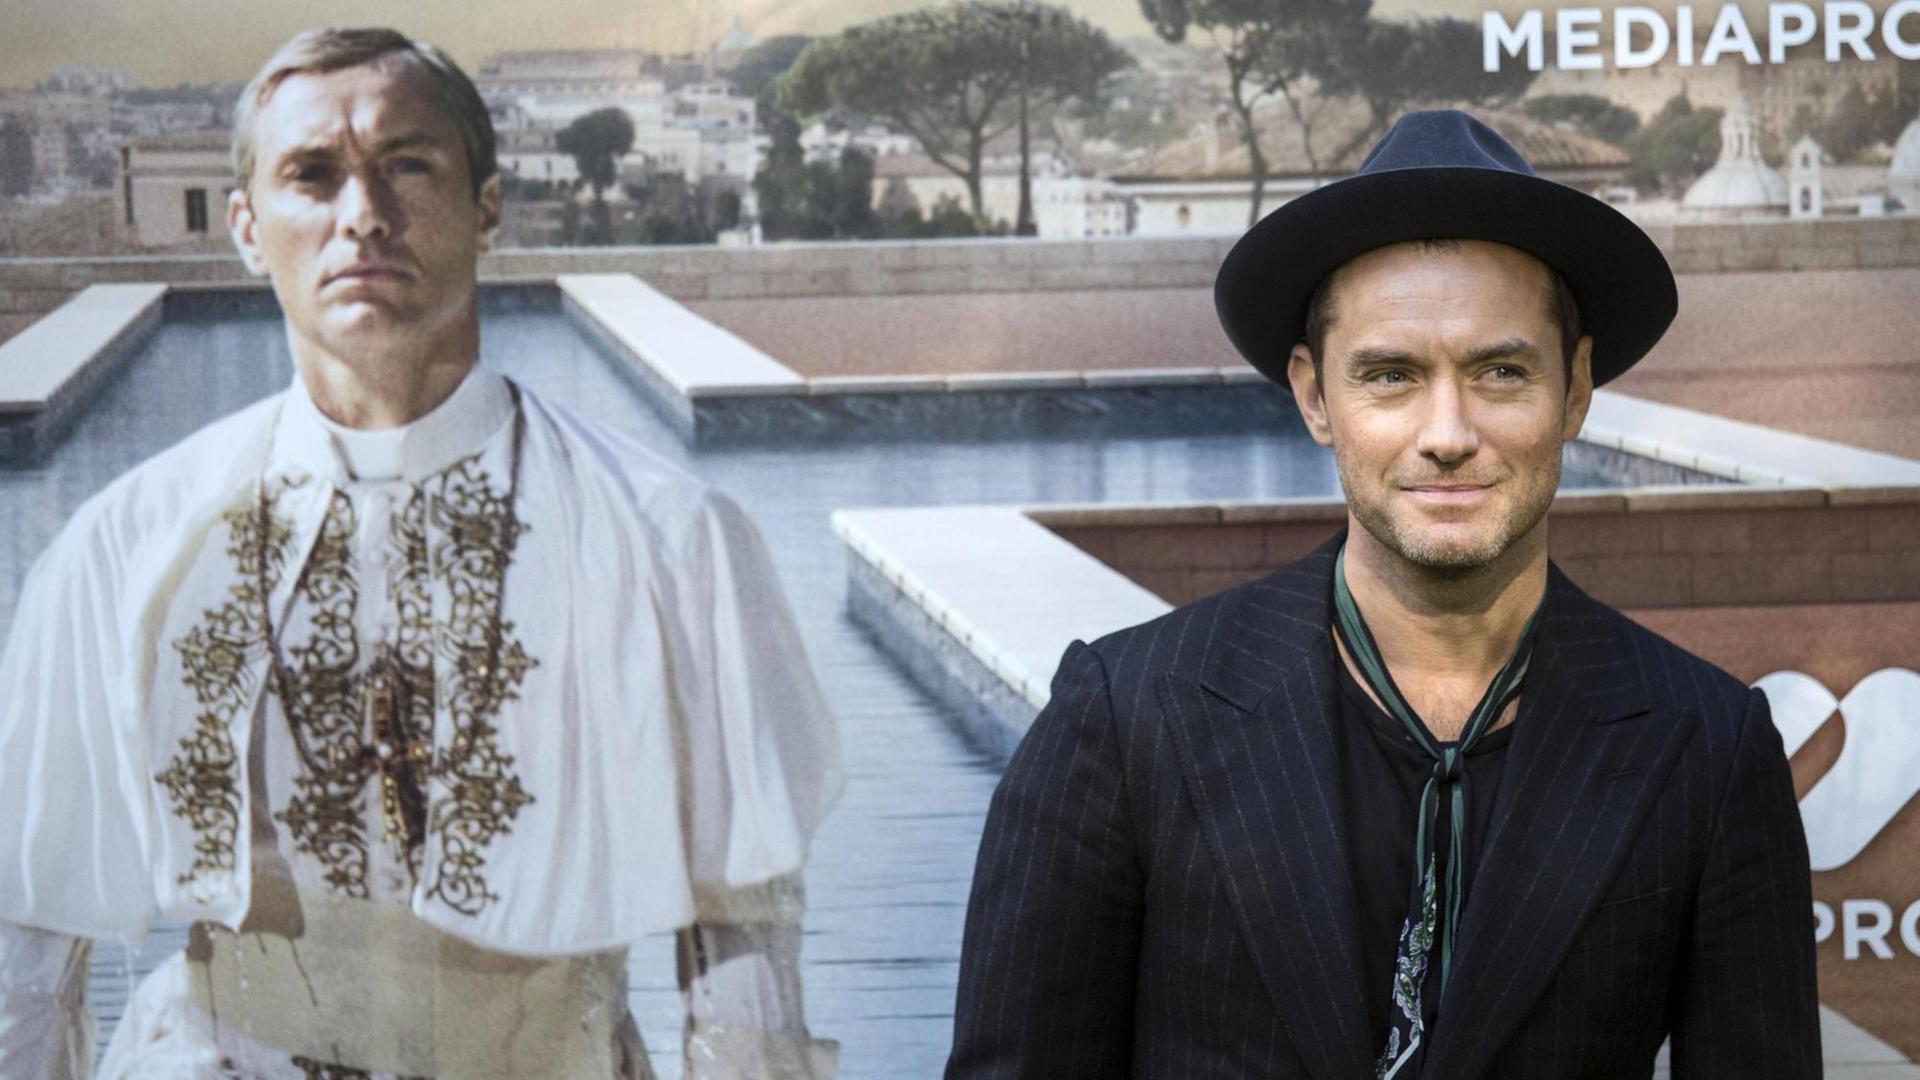 TV-Serie "The Young Pope" Jude Law beim Photocall.